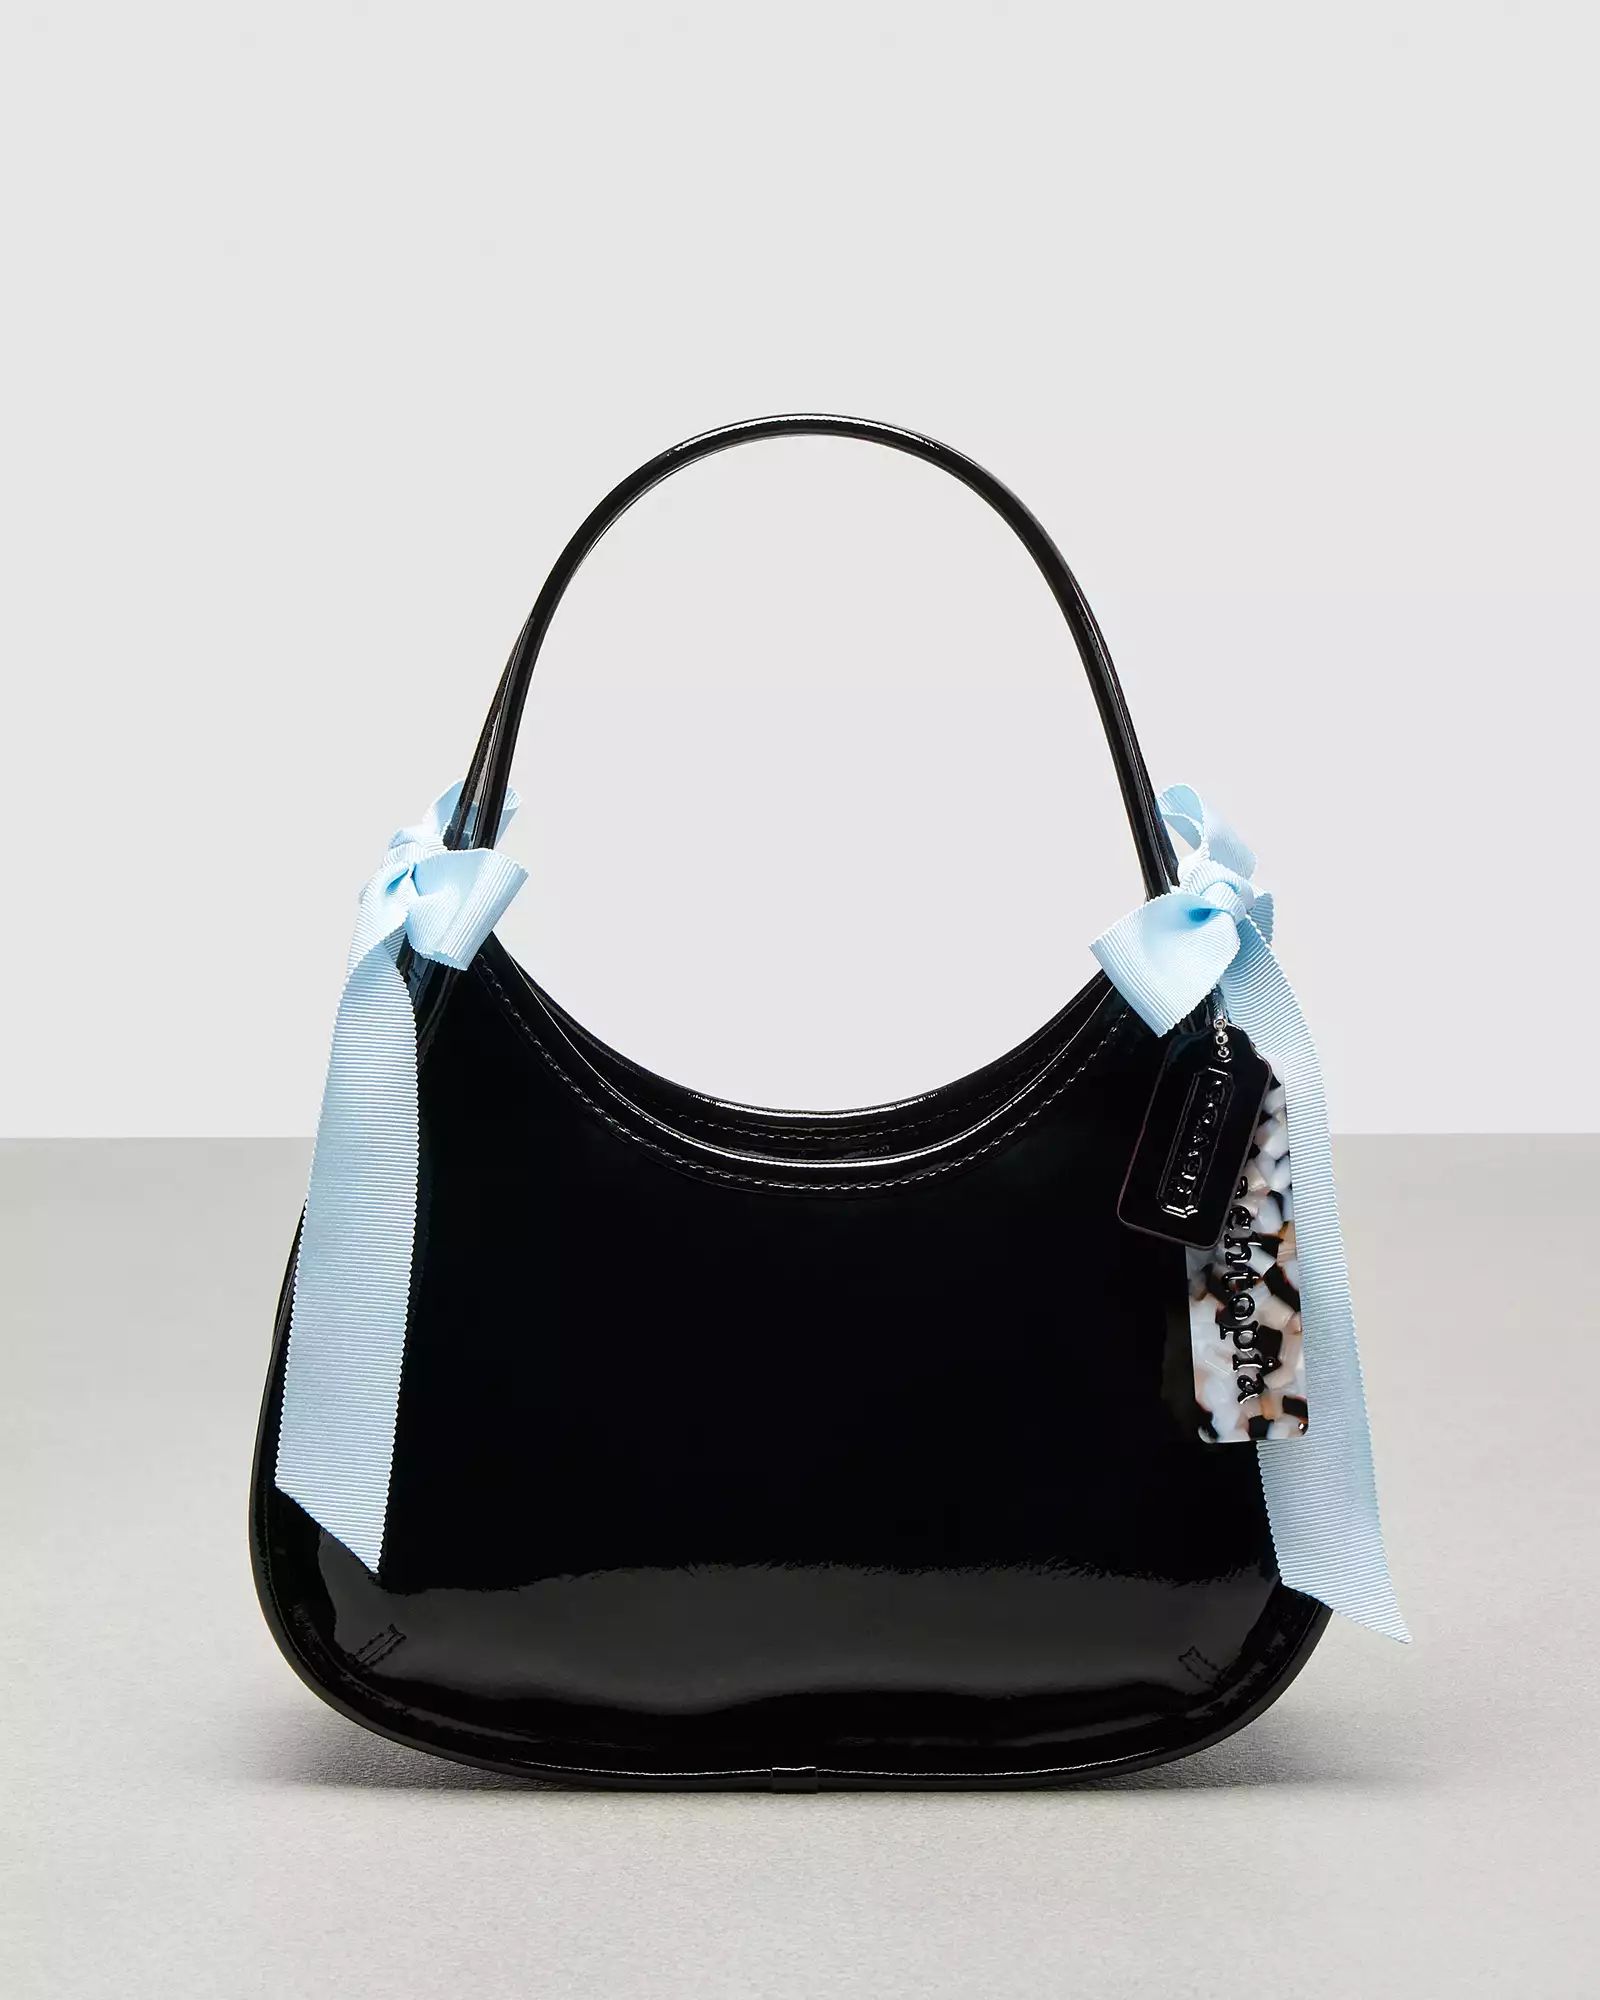 Ergo Bag In Crinkle Patent Coachtopia Leather With Bows | Coach (US)